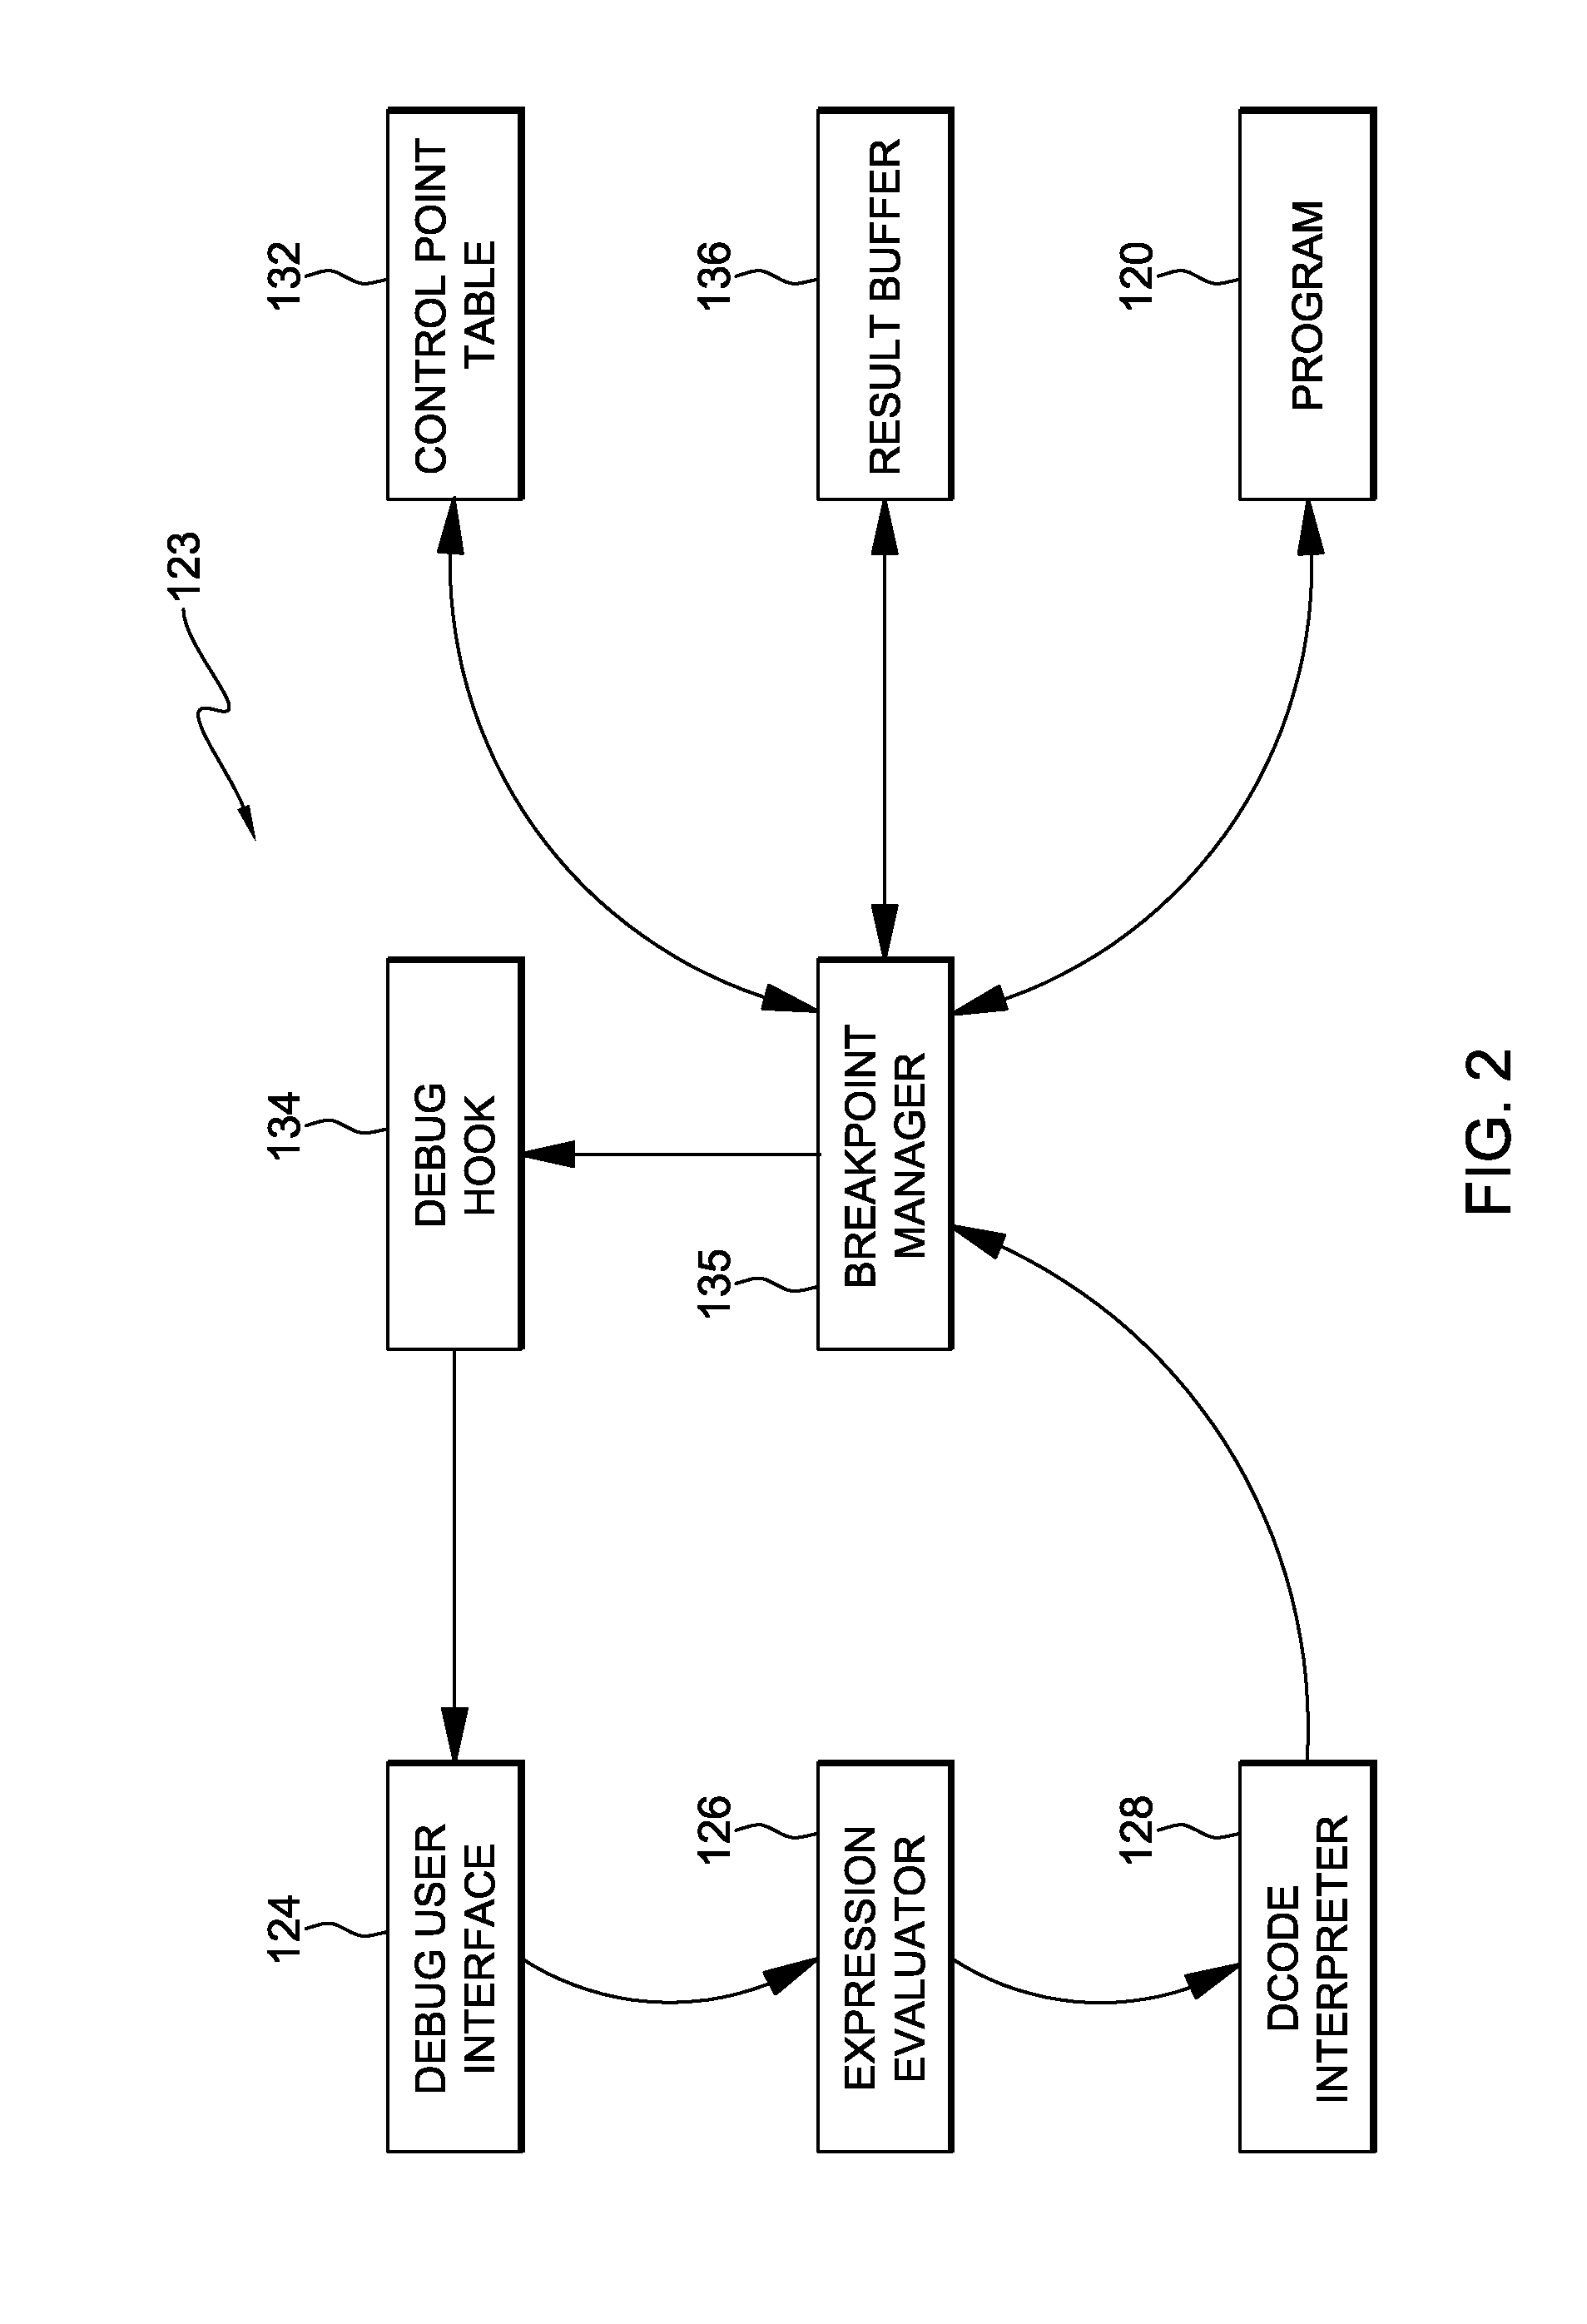 Step-type operation processing during debugging by machine instruction stepping concurrent with setting breakpoints